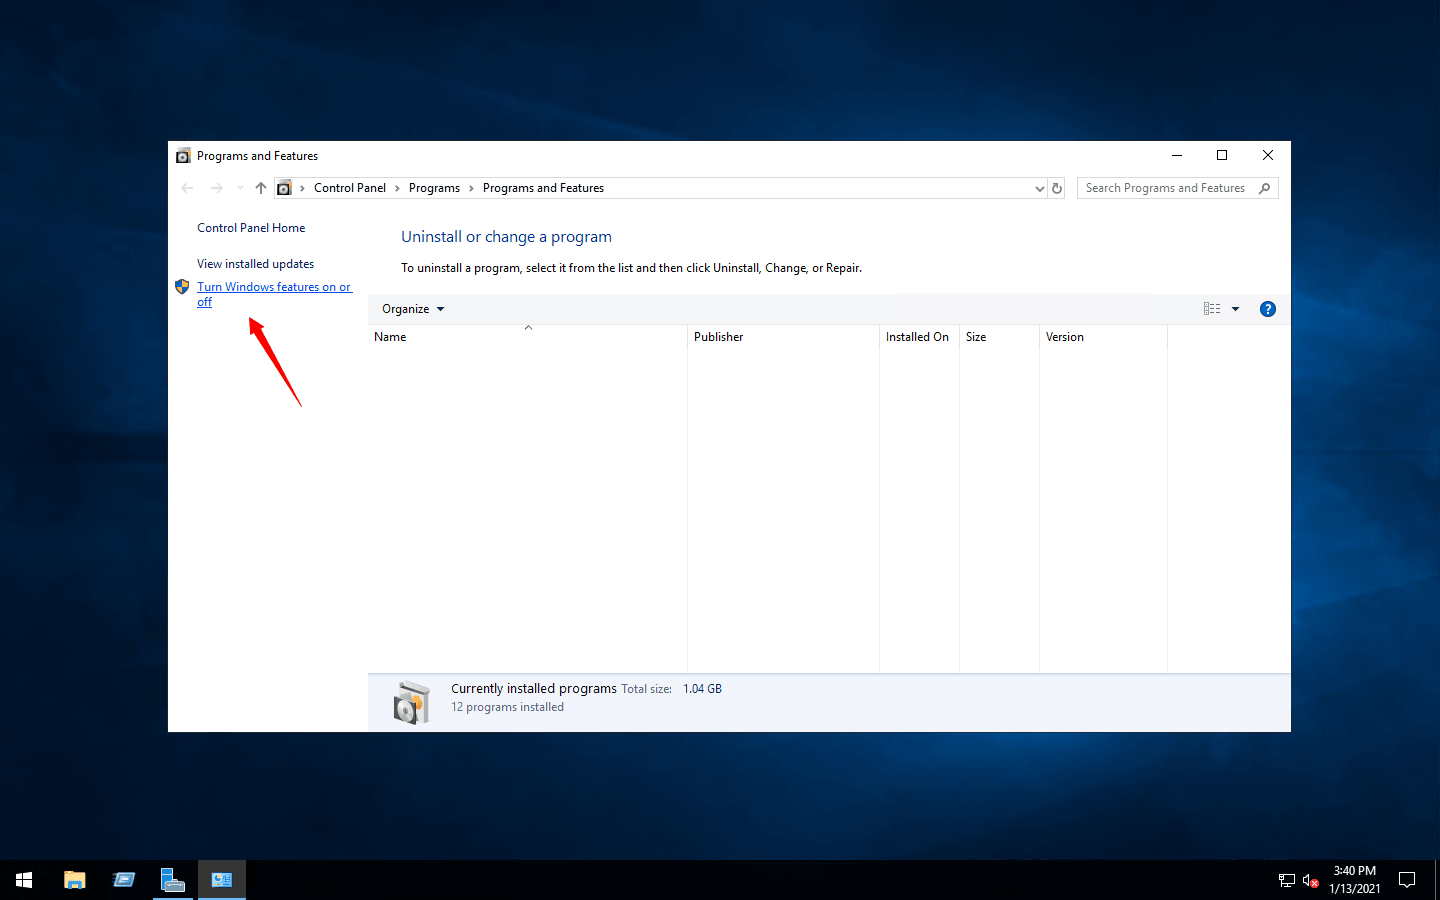 'Turn Windows features on or off'